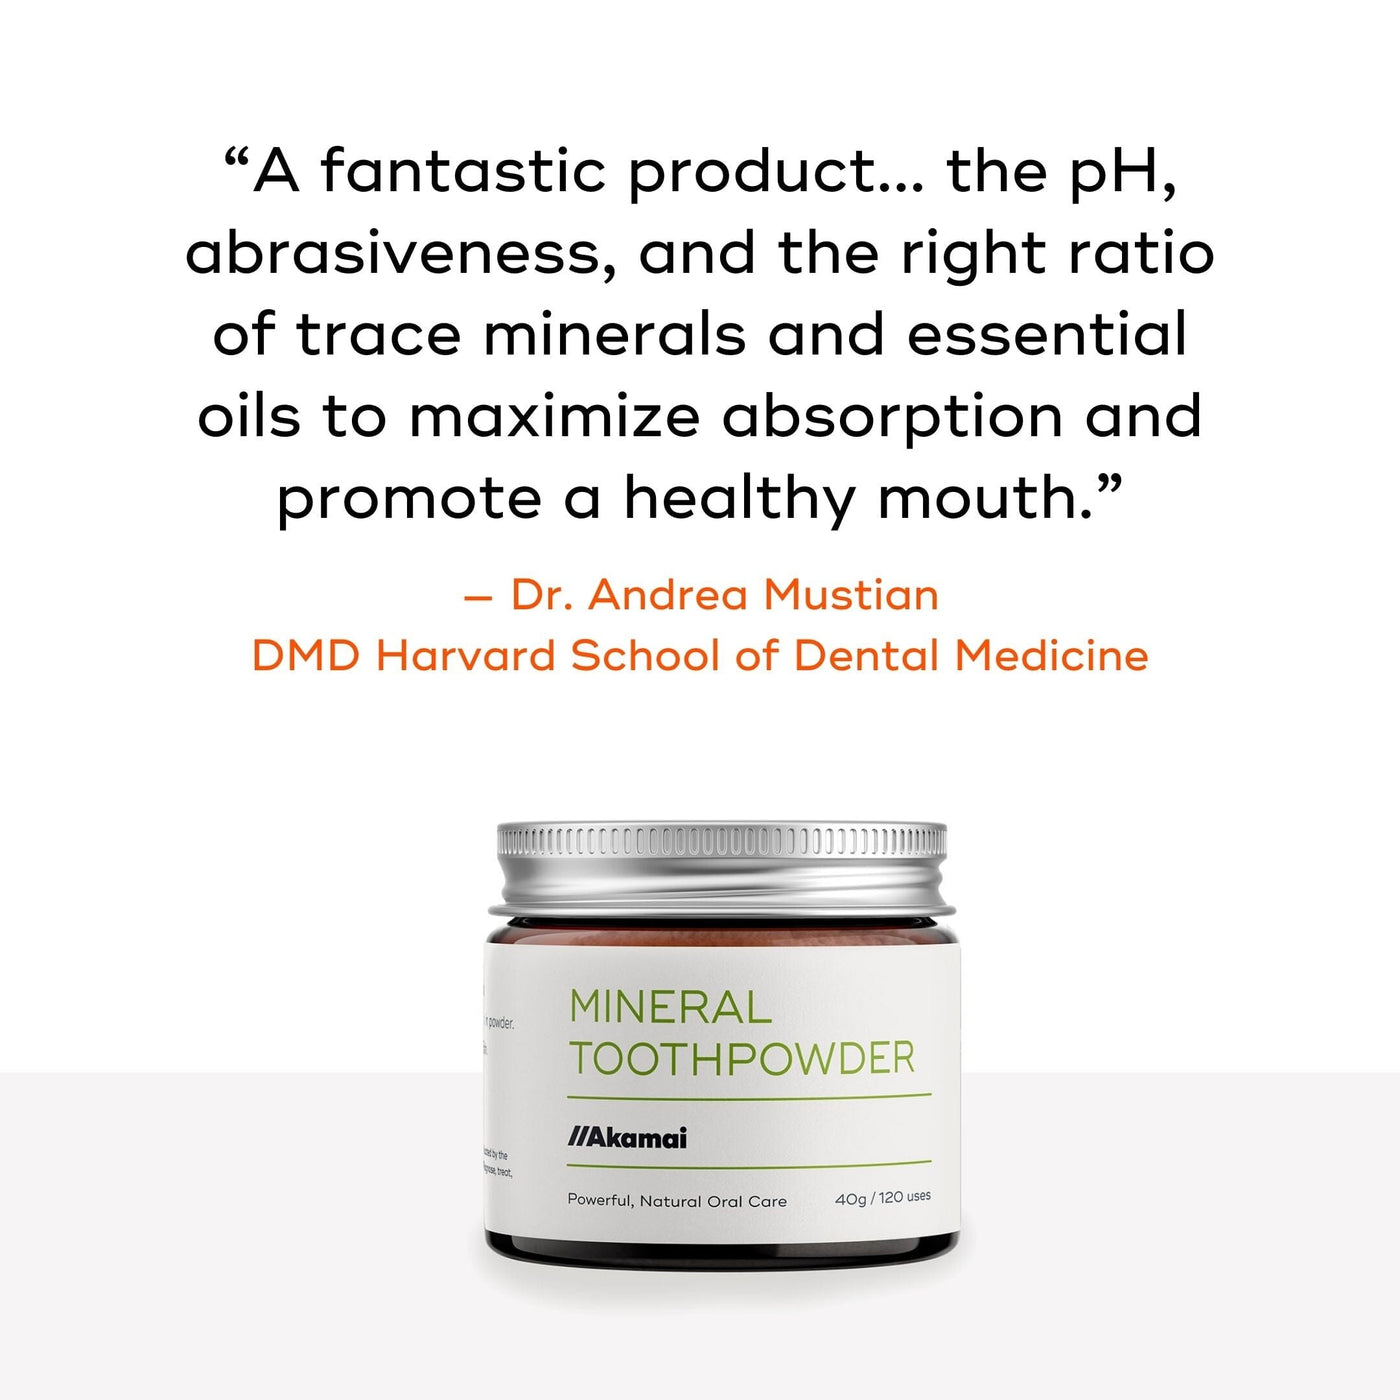 Dr. Andrea Mustian's review of Mineral Toothpowder